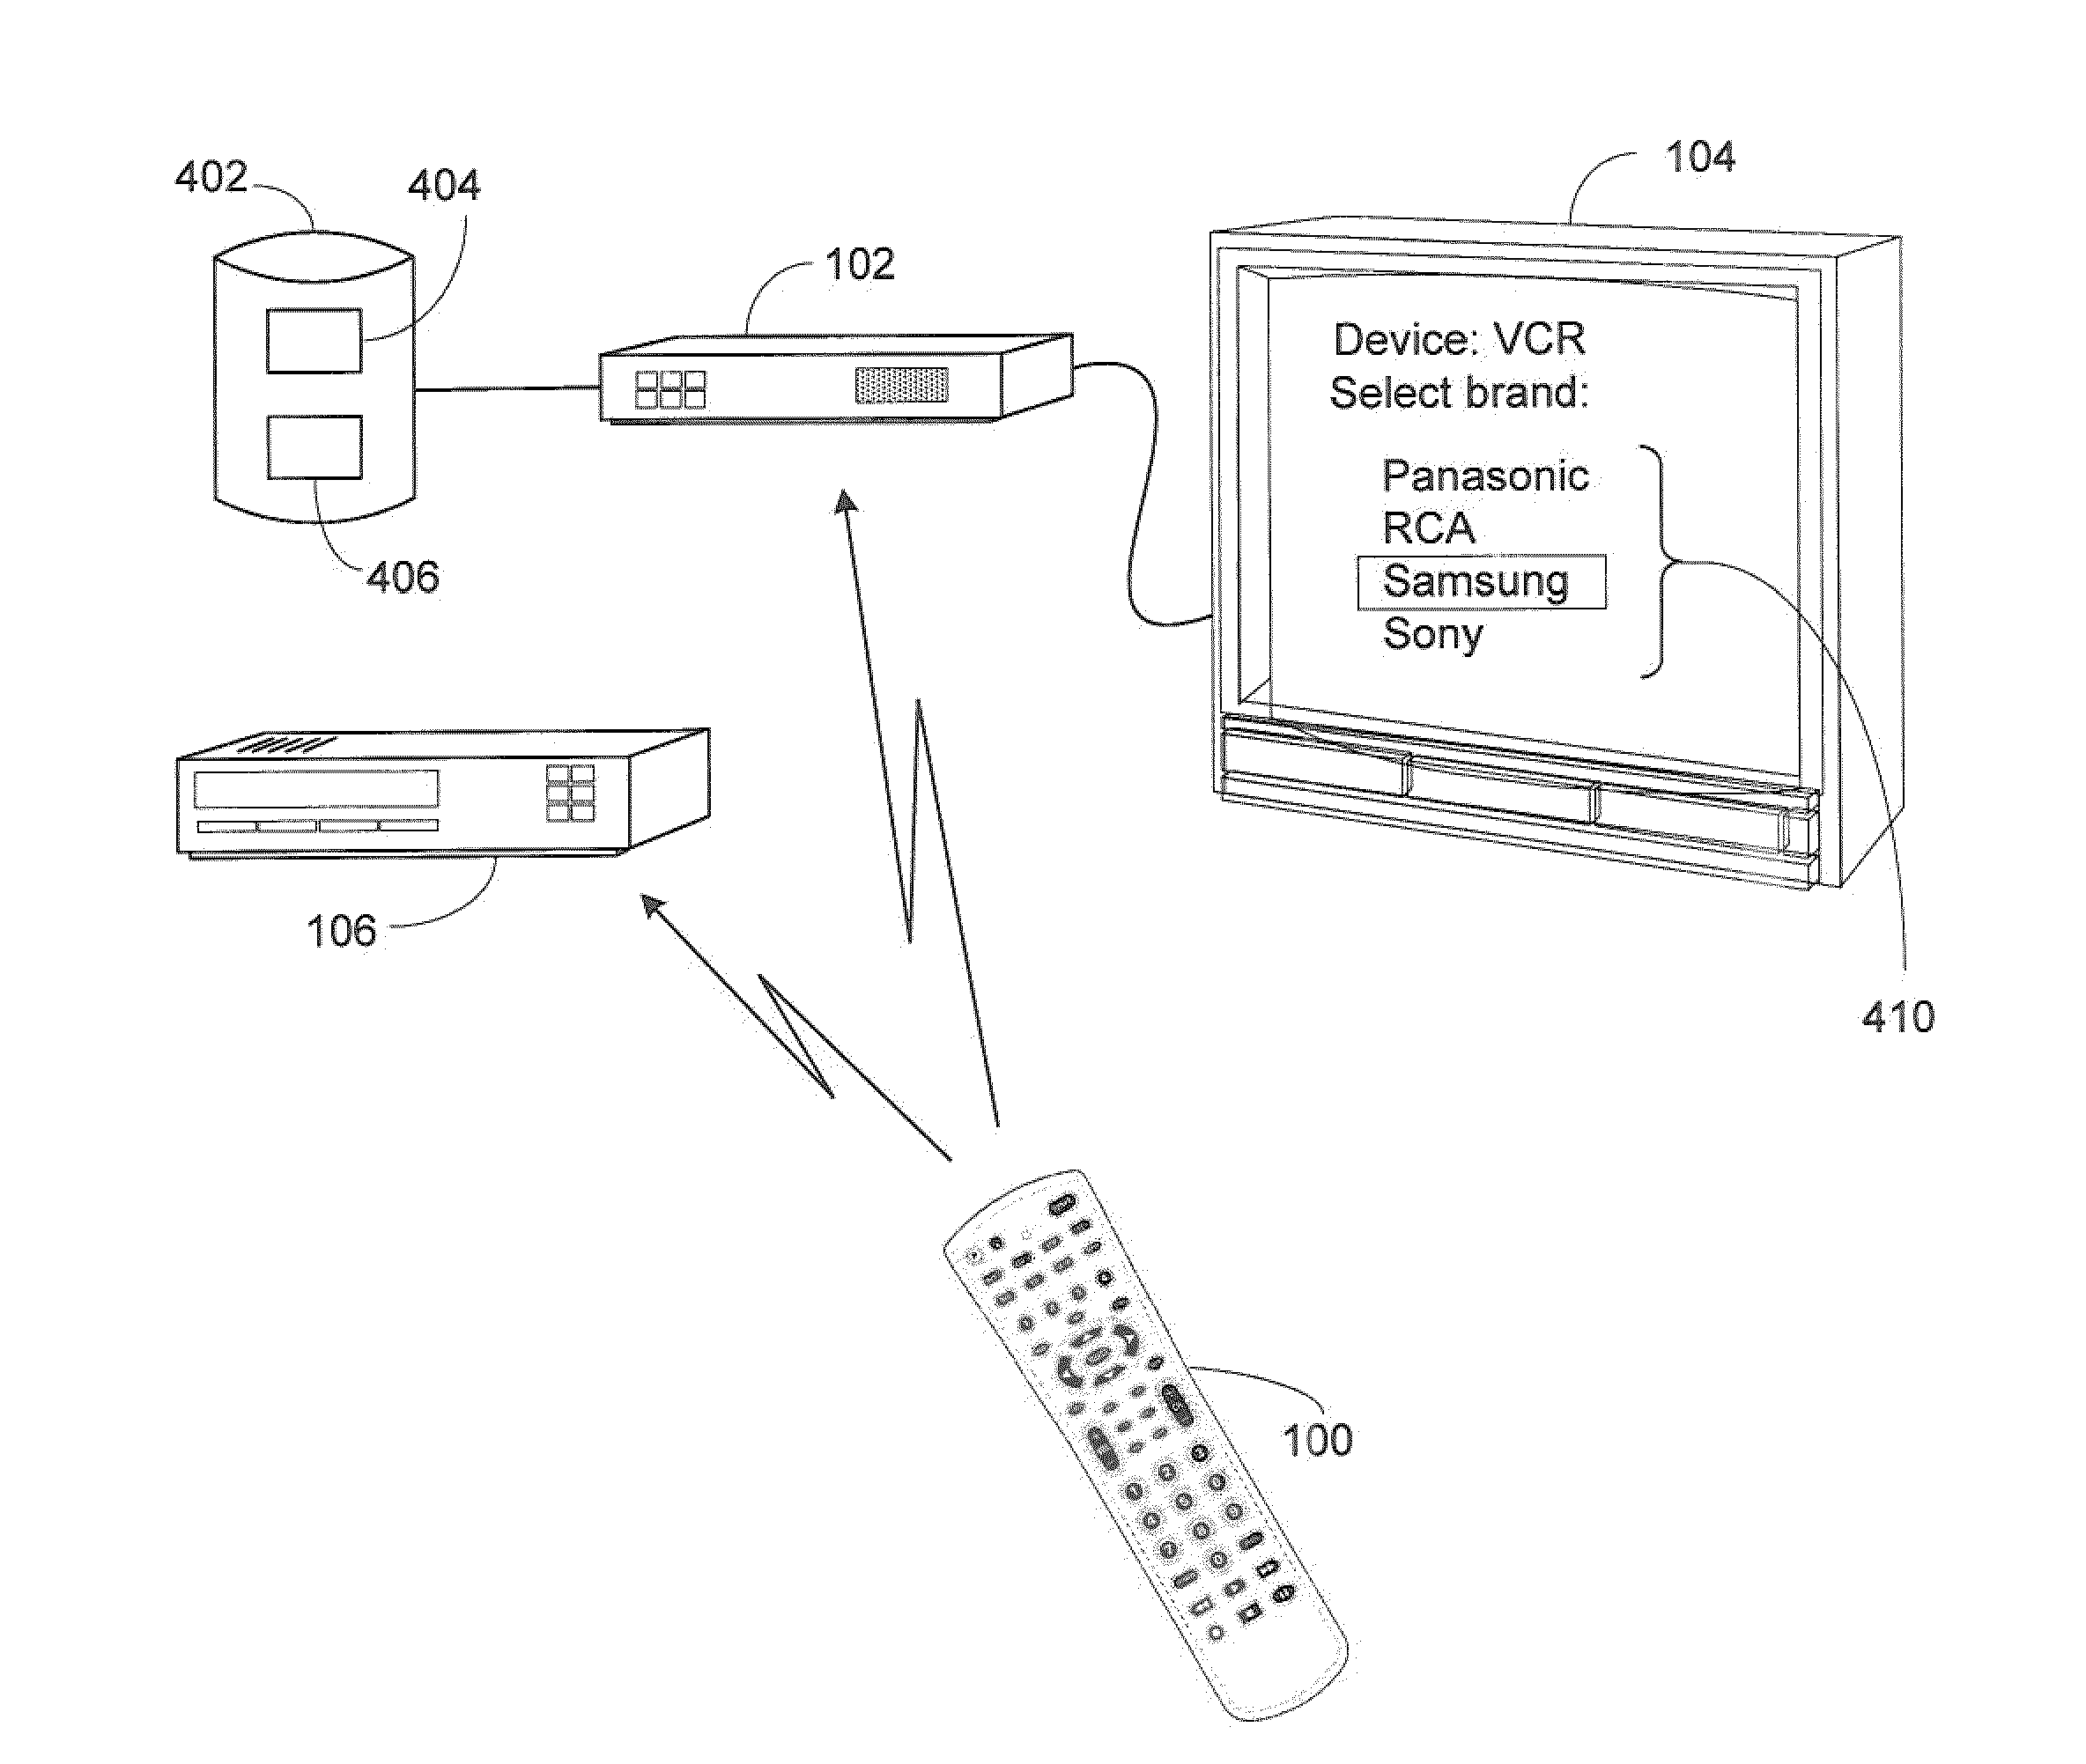 System and method for widget-assisted setup of a universal remote control